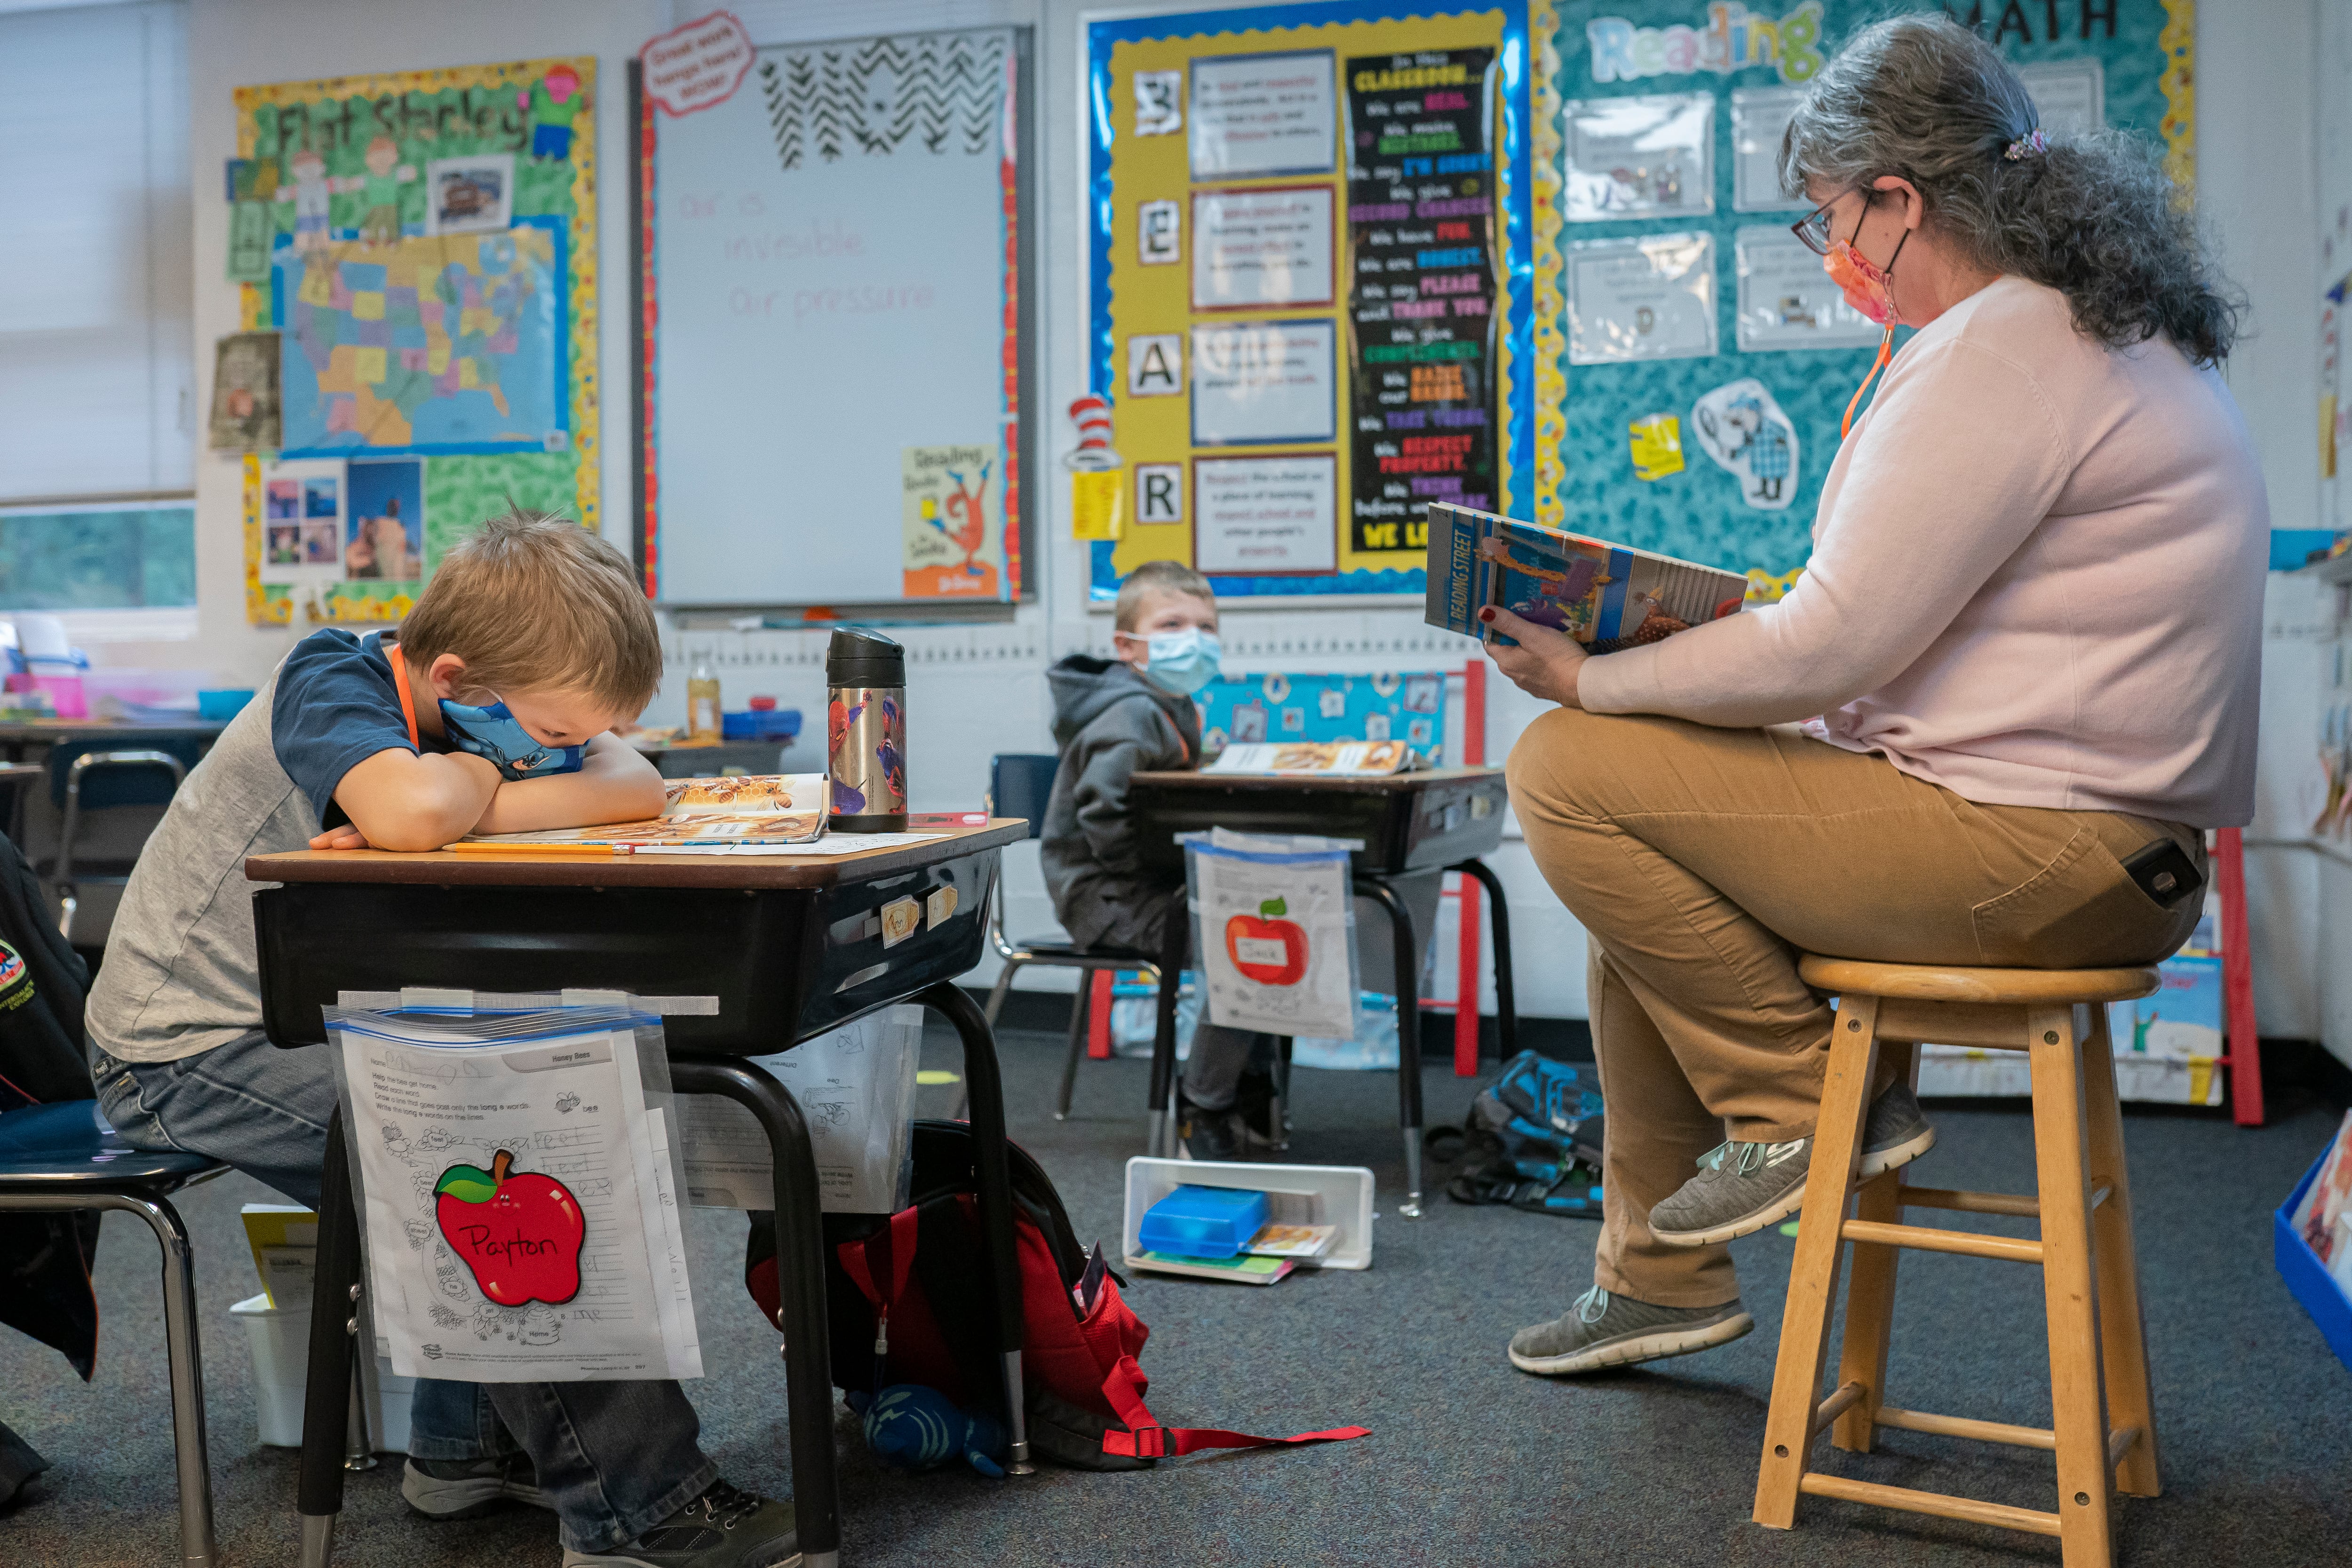 A masked teacher sitting on a stool looks at a book while a masked student, sitting at a desk in front of the teacher and his head resting on his crossed arms, looks at an open book. 